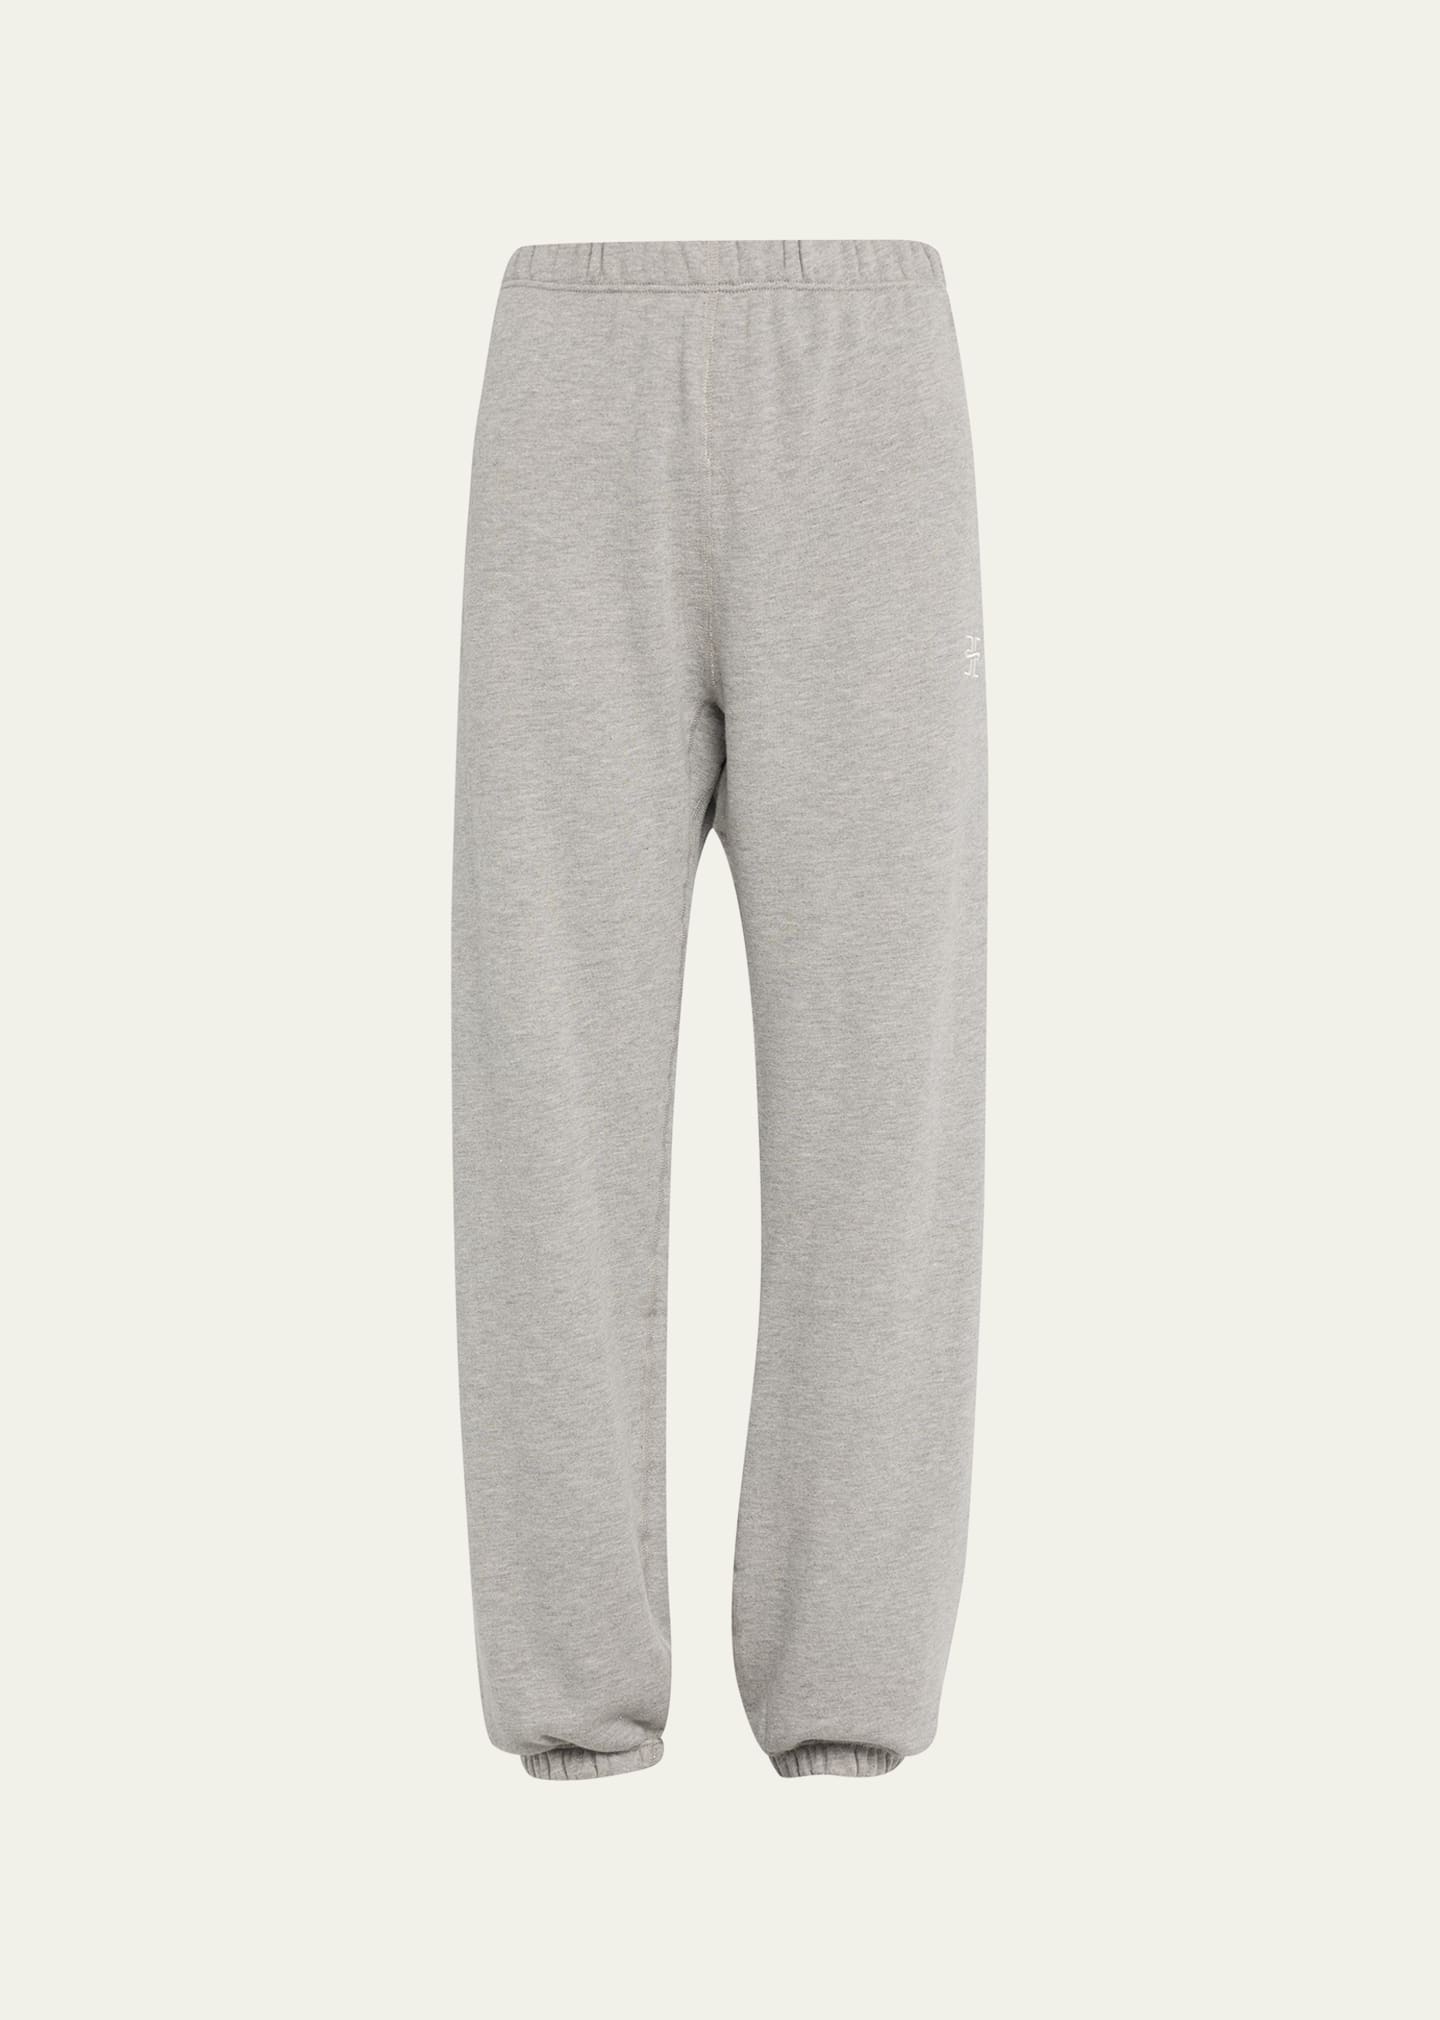 Eterne Classic French Terry Cinched-Cuff Sweatpants